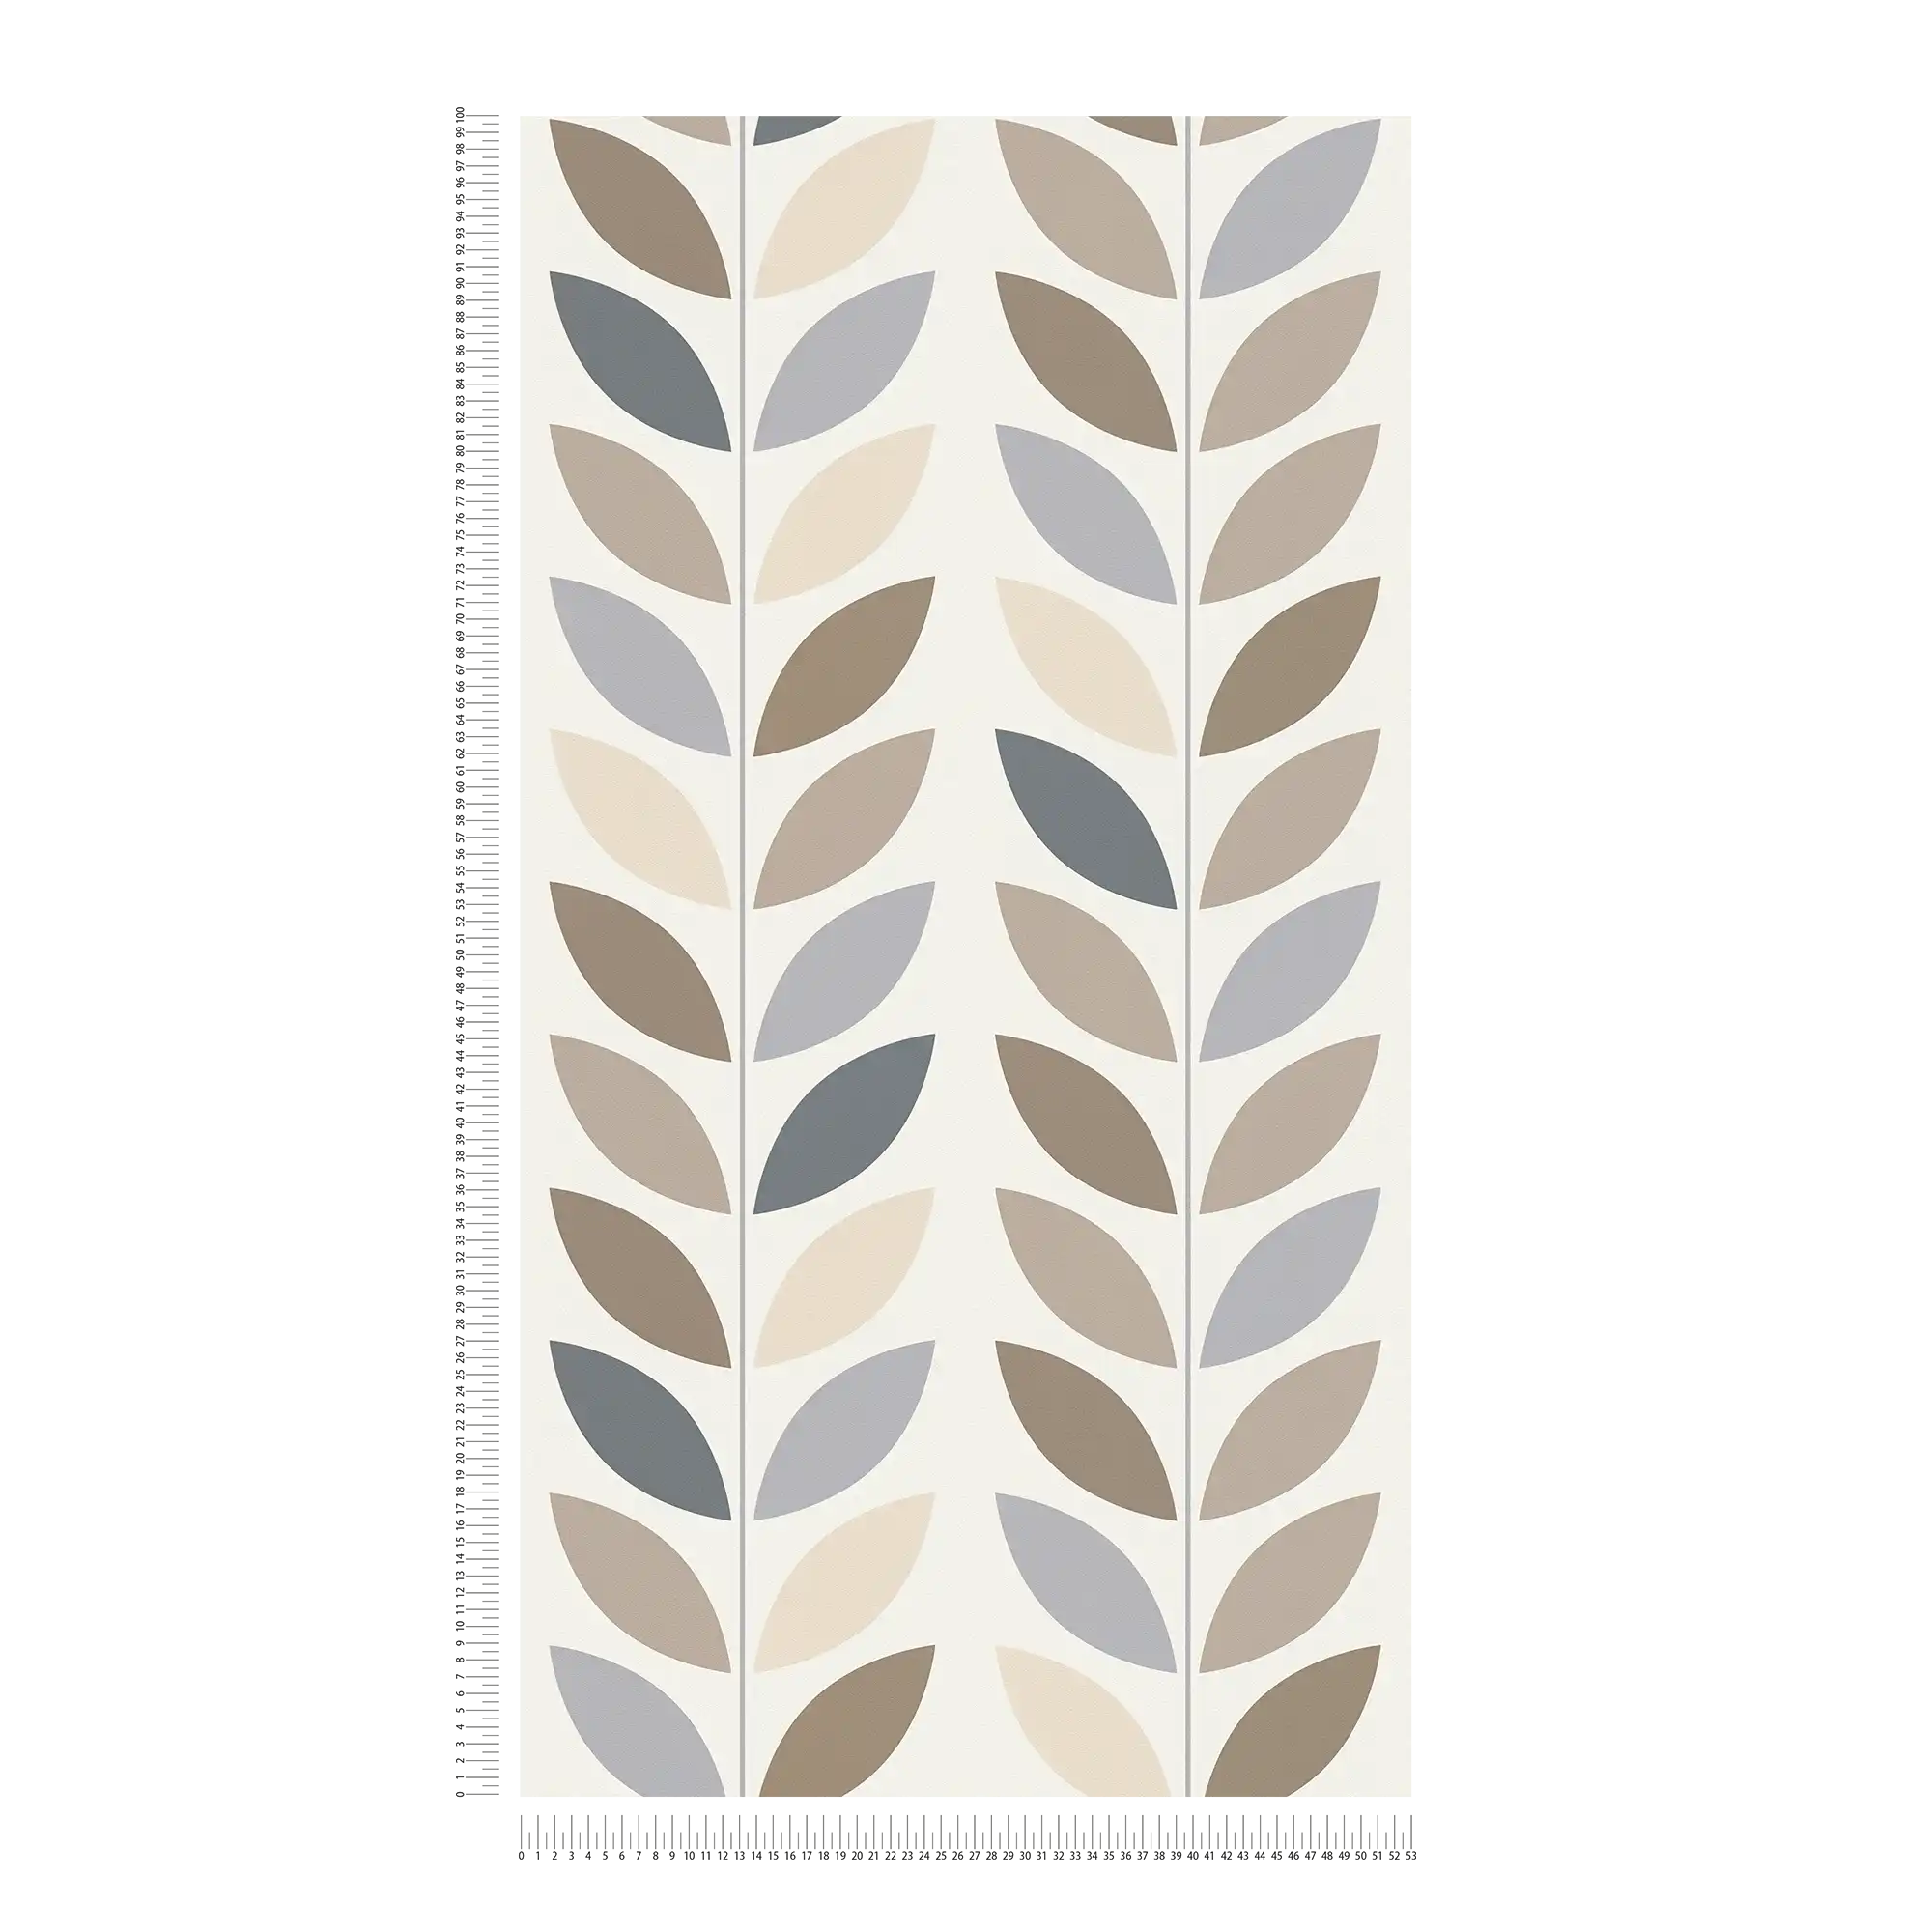             Retro style non-woven wallpaper with leaf pattern - cream, blue, brown
        